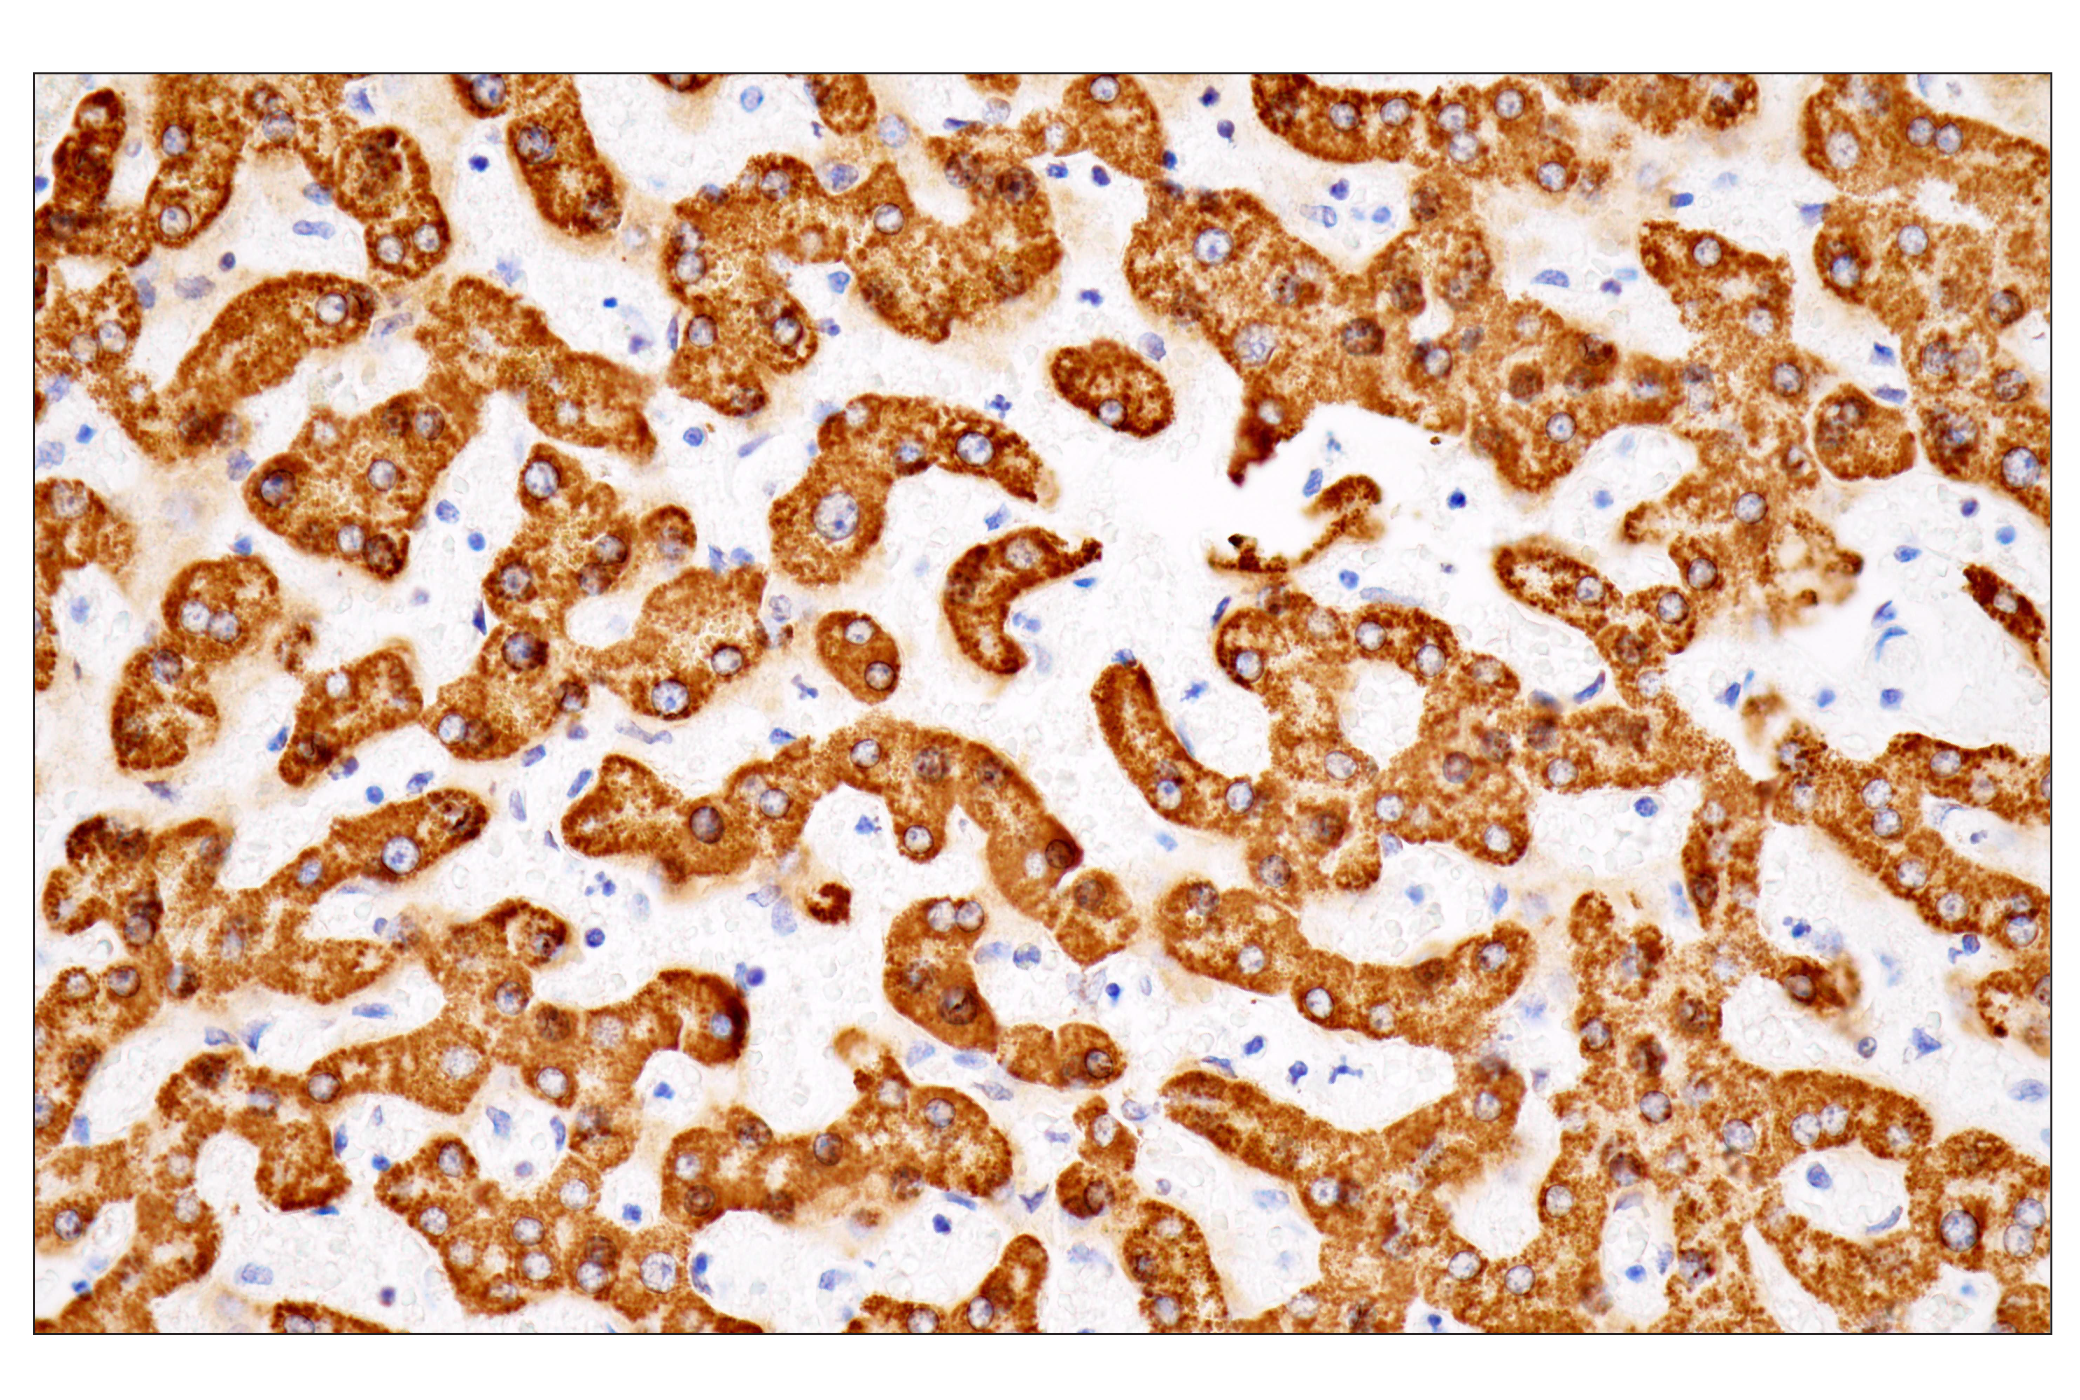 Immunohistochemistry Image 5: CPS1/Hep Par-1 (OCH1E5) Mouse mAb (Clone previously known as Hepatocyte Specific Antigen)